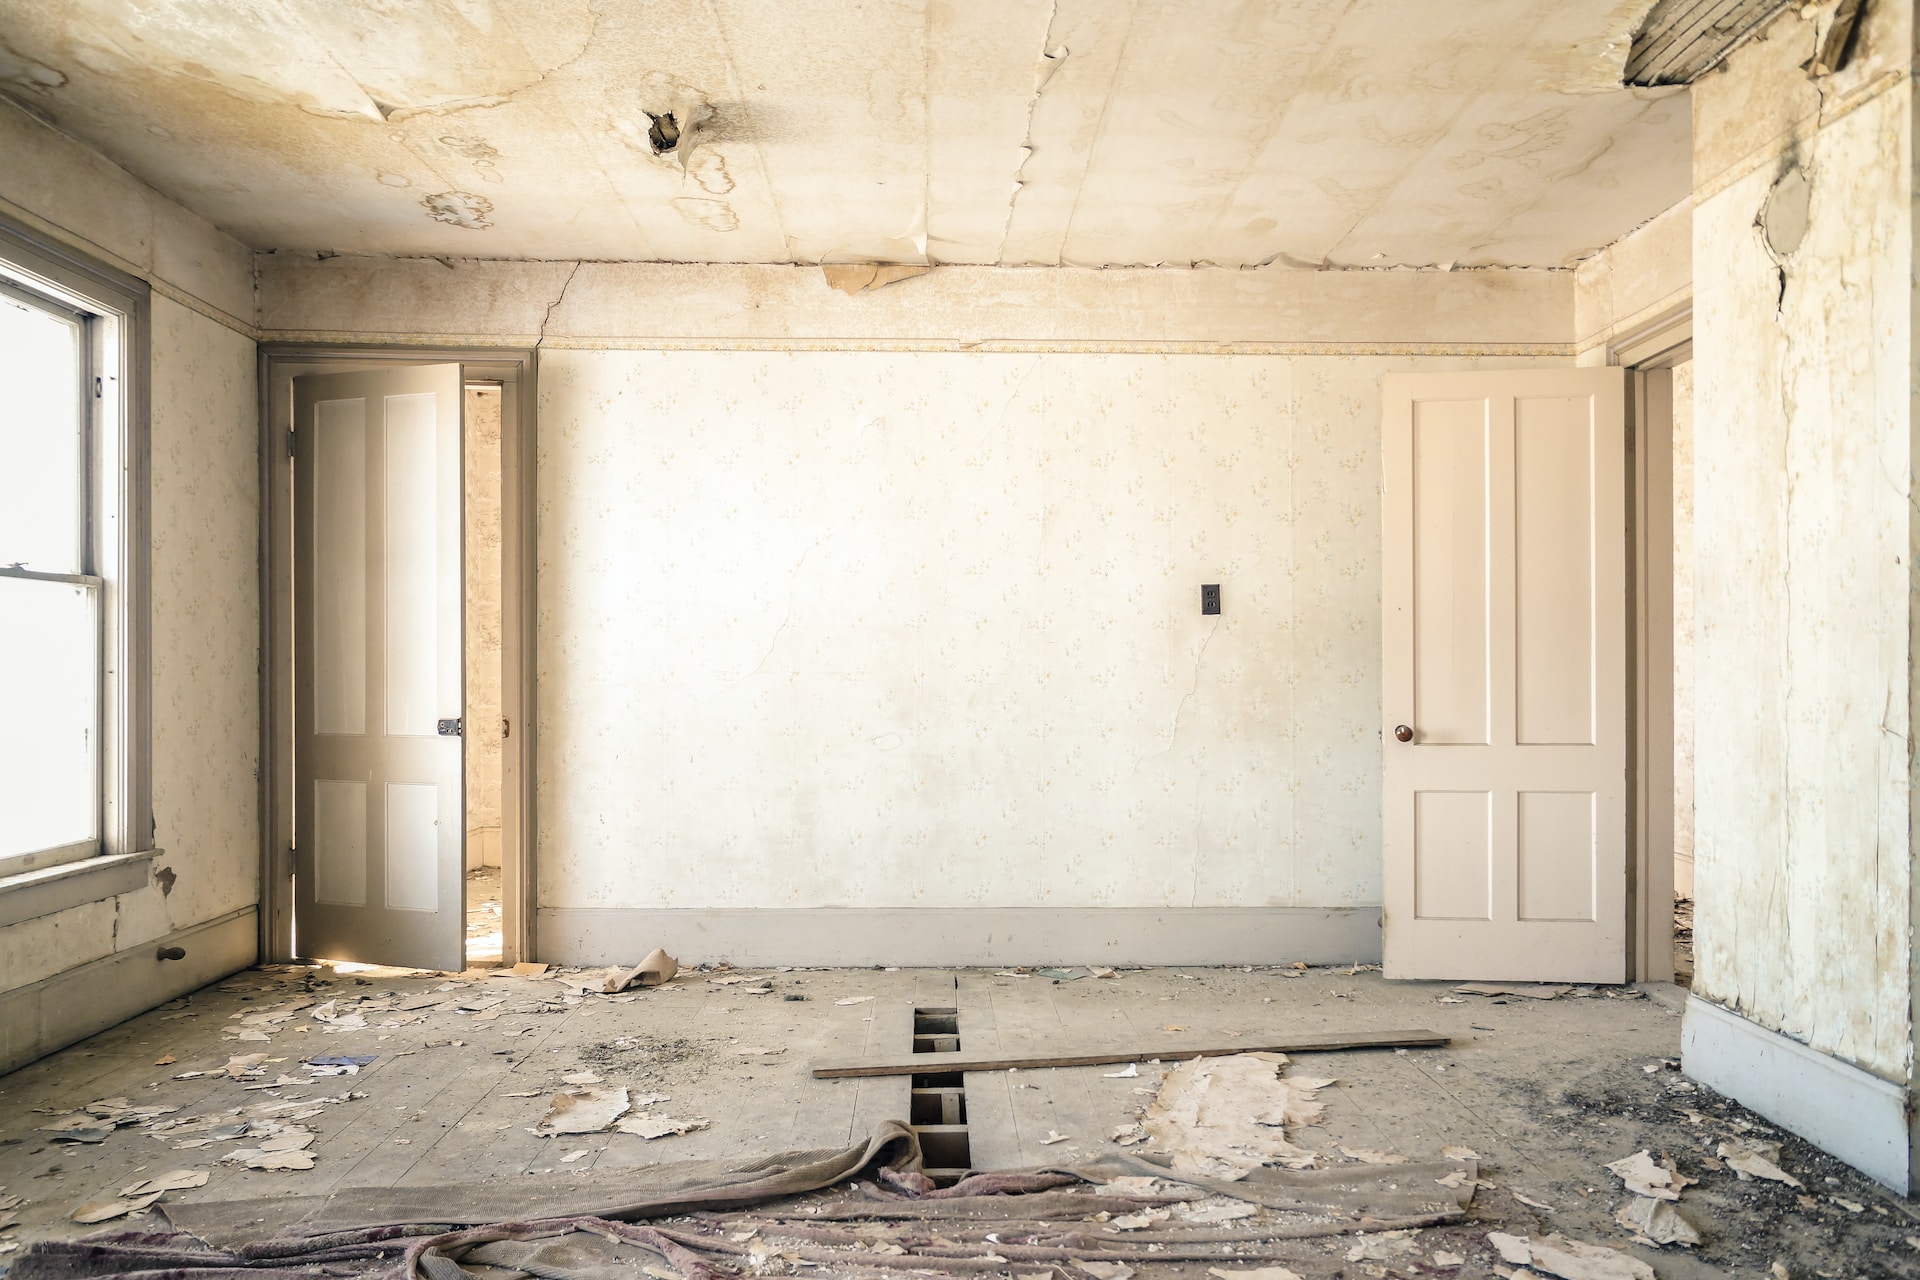 interior, house images, construction, abandoned, wall, HD background images, home, building, website backgrounds, renovation, estate, rooms, doors, plumbing, rumble, backgrounds